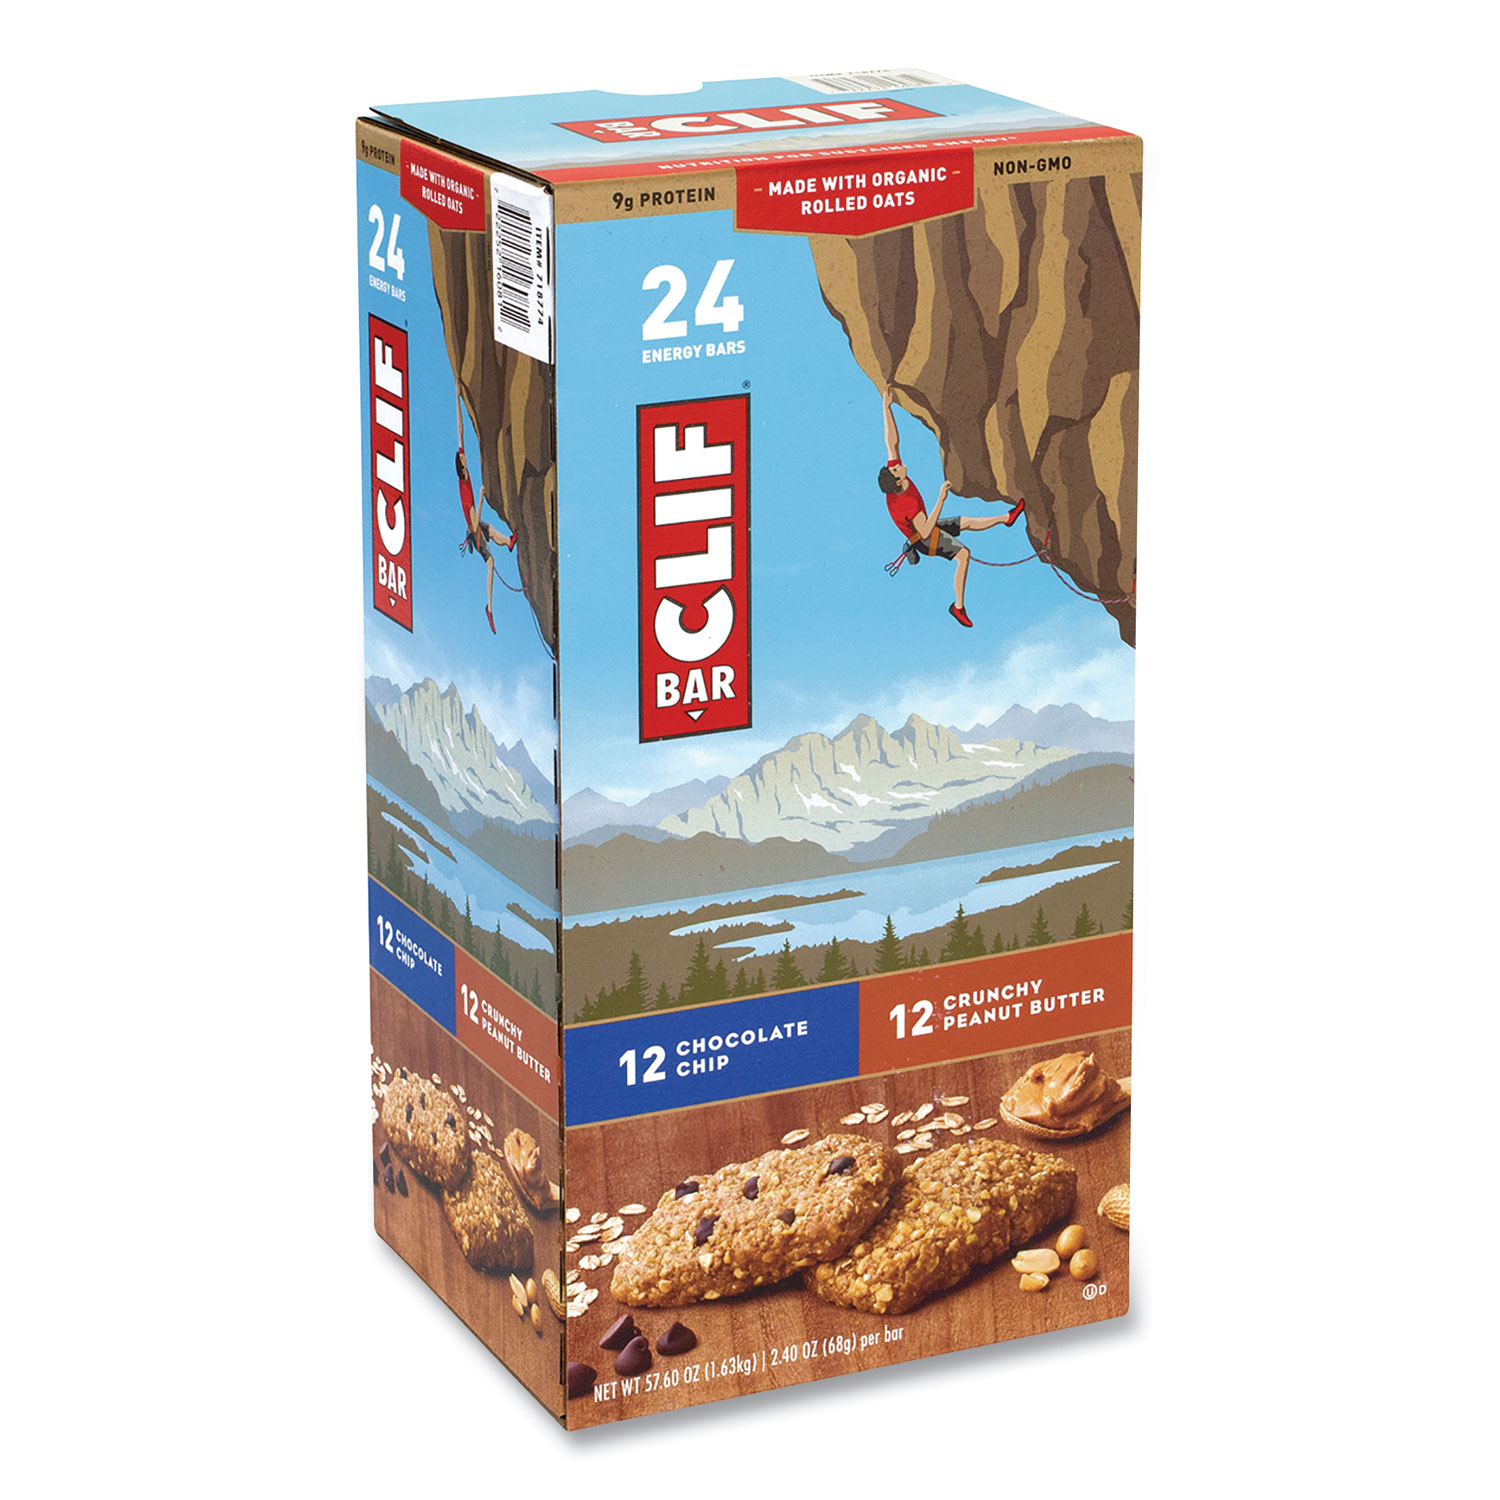  CLIF Bar 33100 Energy Bar, Chocolate Chip/Crunchy Peanut Butter, 2.4 oz, 24/Box, Free Delivery in 1-4 Business Days (GRR22000438) 